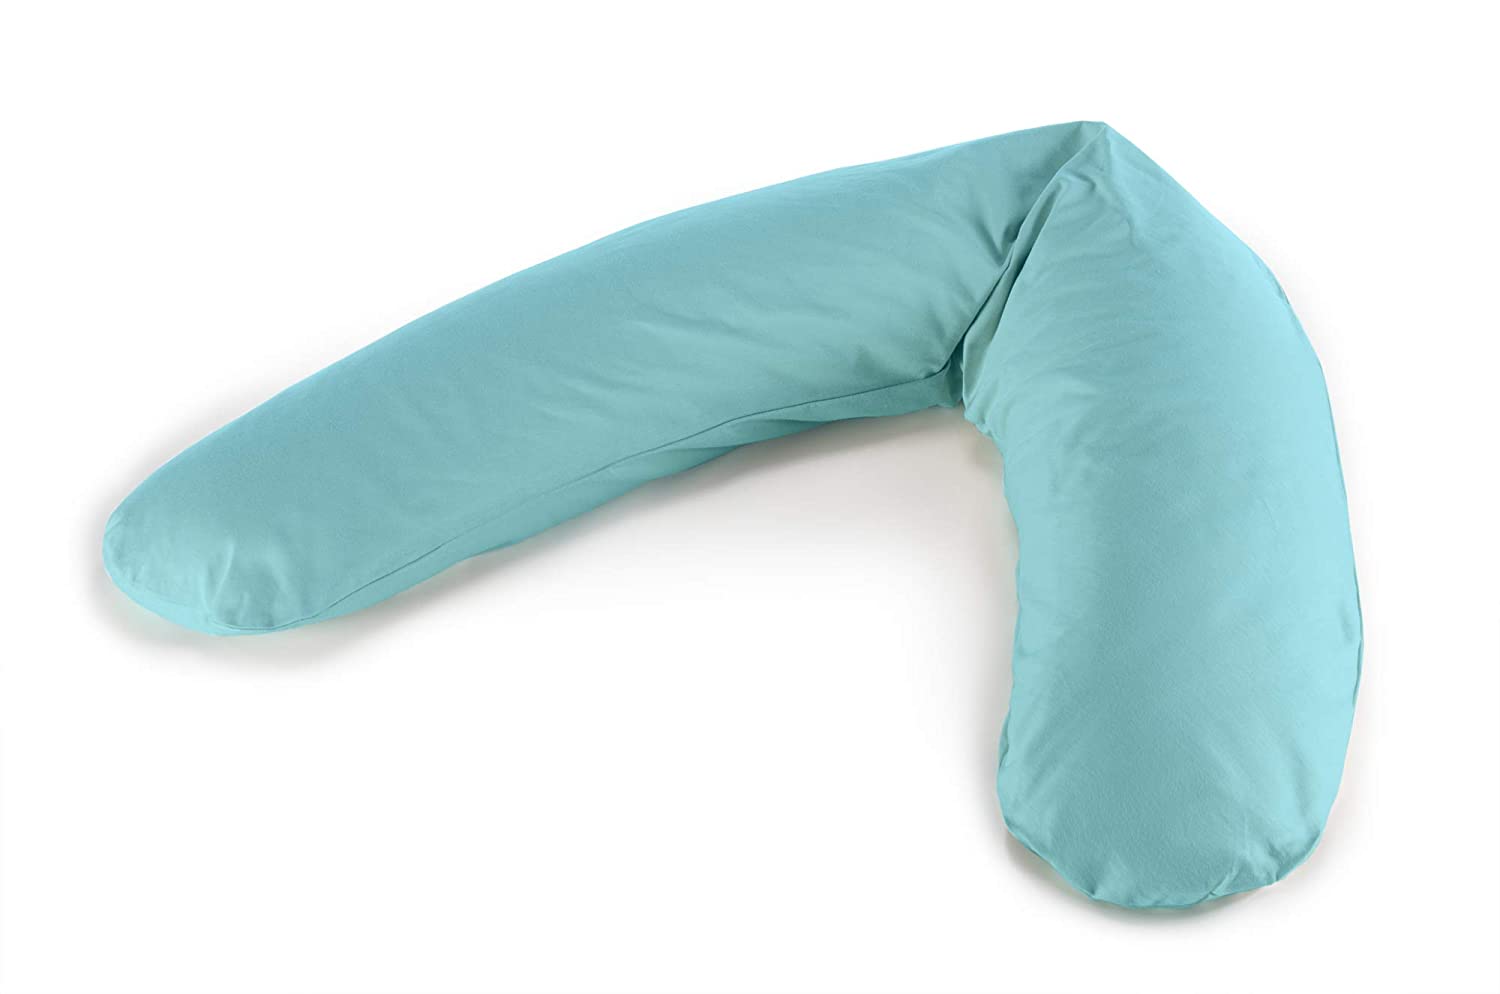 The Theraline Comfort Nursing Pillow Filled with Fine Sandy Micro Beads Including Outer Cover 180 cm